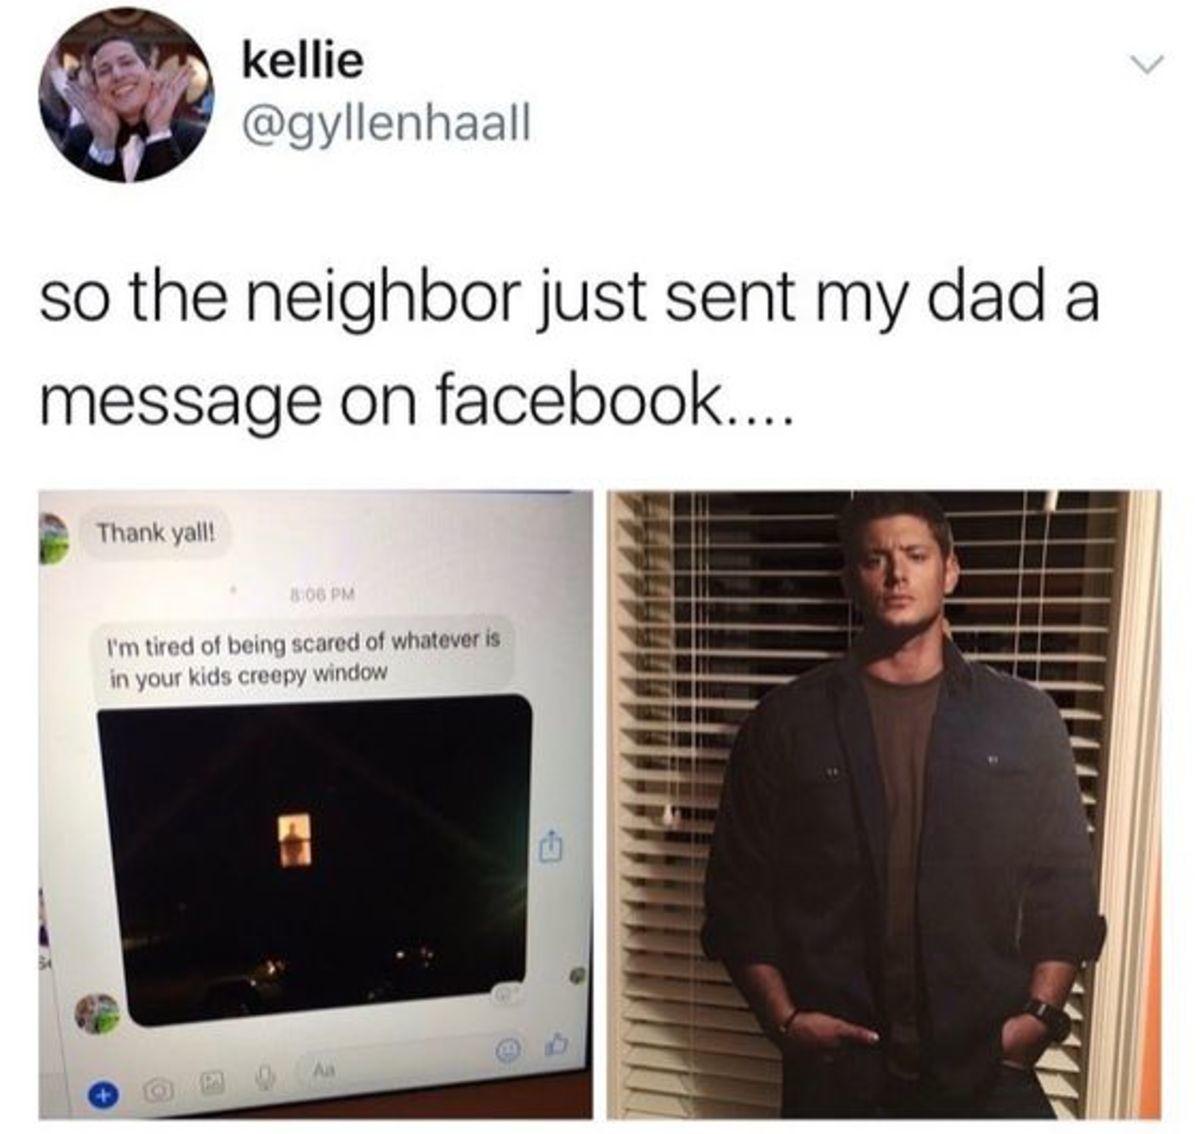 funny keep calm memes - kellie so the neighbor just sent my dad a message on facebook.... Thank yall! Bog Pm I'm tired of being scared of whatever is in your kids creepy window